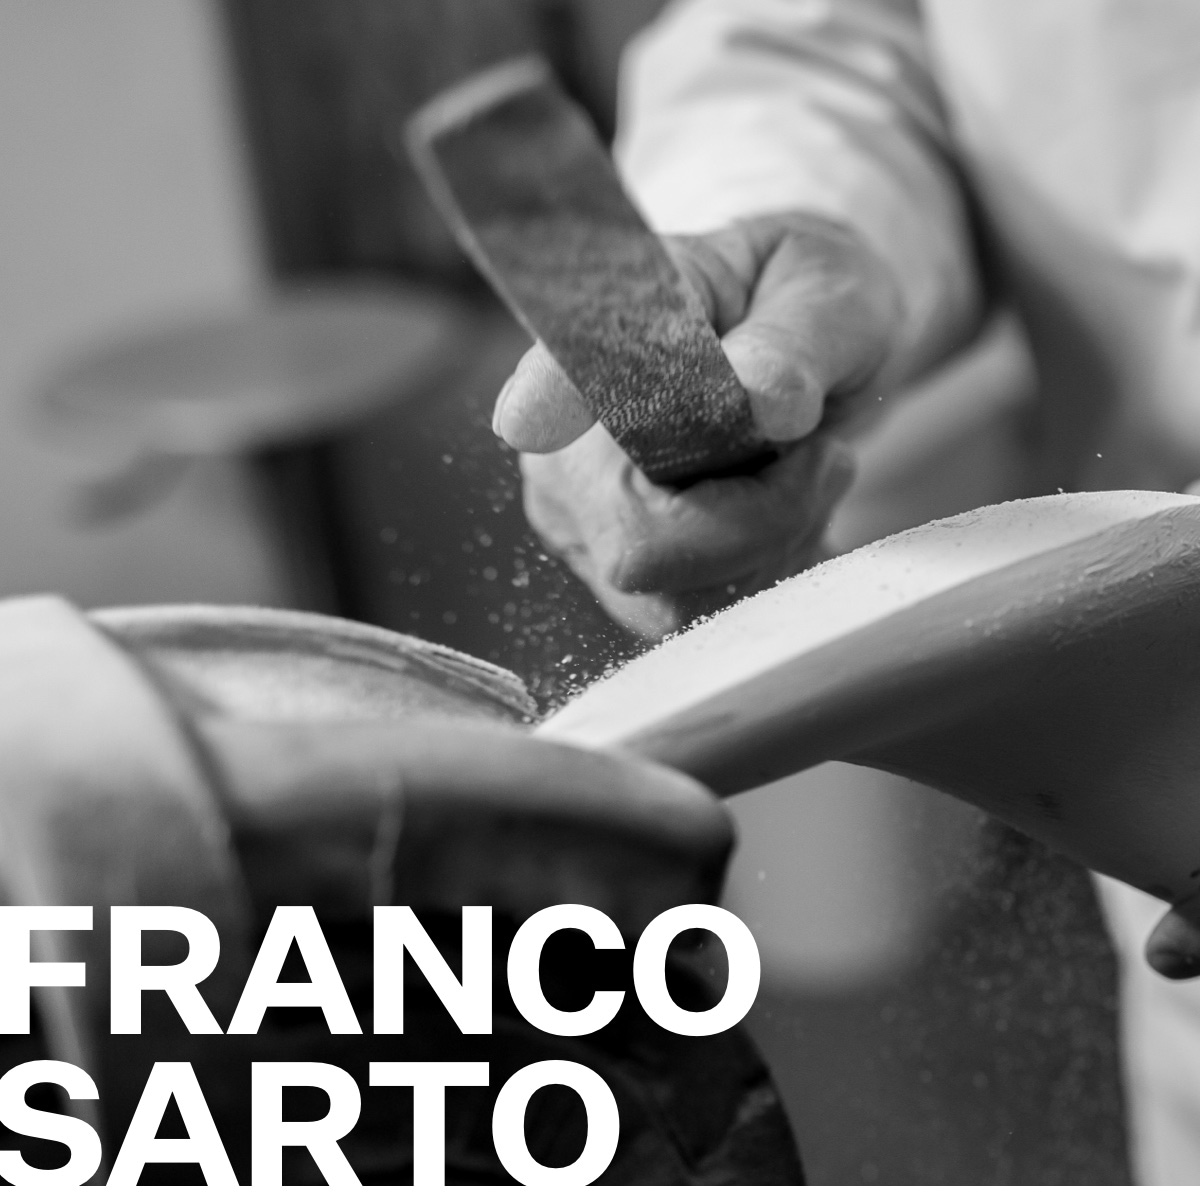 the words Franco Sarto overlaid on an image of a man making shoes